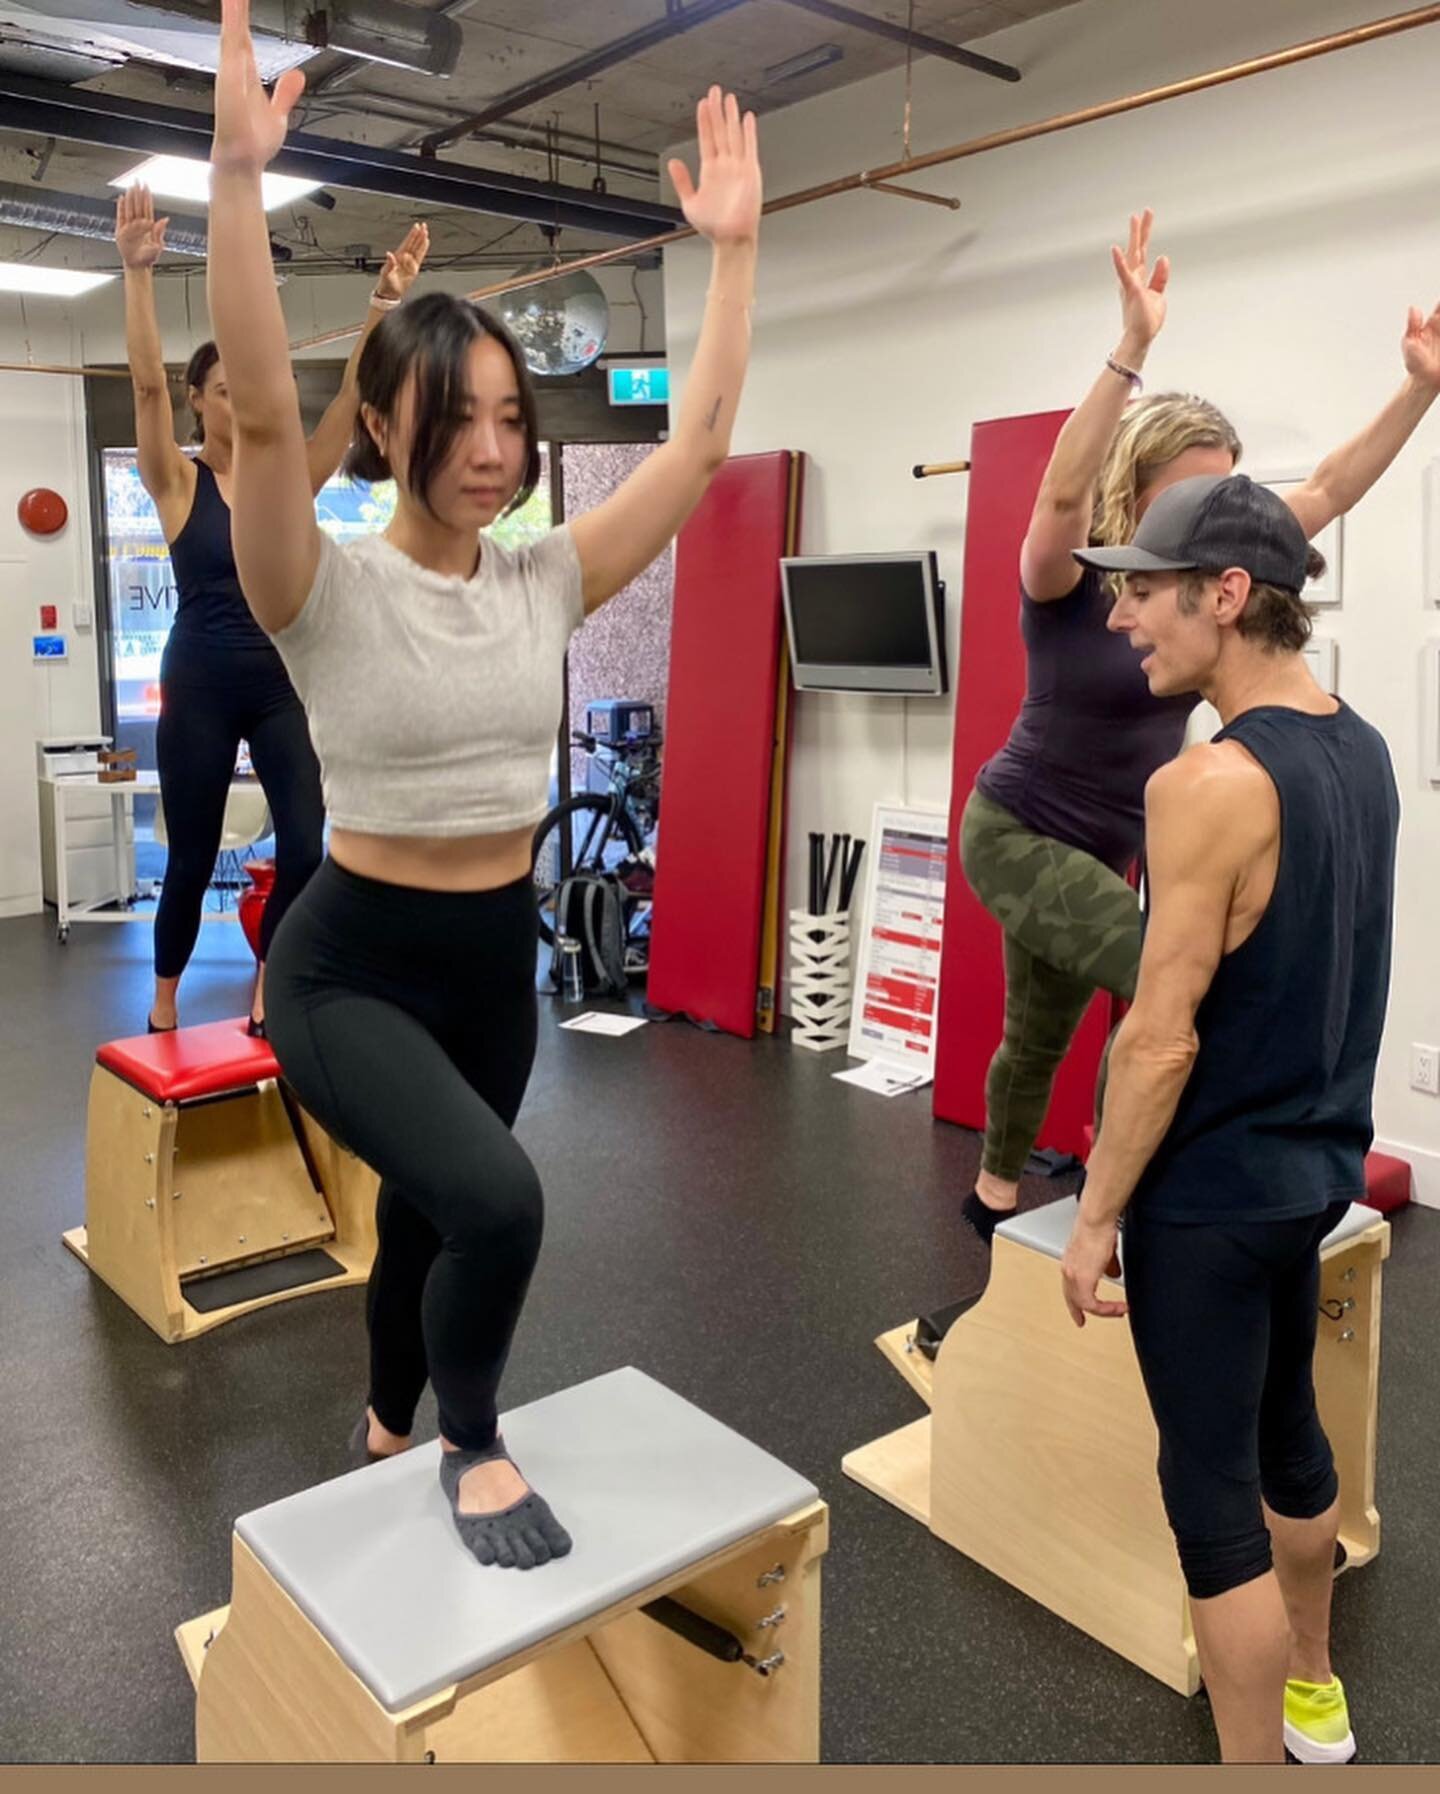 The Mighty Wunda Chair .. we love you.. We found so much good stuff during our last workshop. Thank you everyone for showing and rising up to these Mighty Wunda moments. @contrology.bb @gratz_pilates @thepilatescollective.ca @noamgagnon